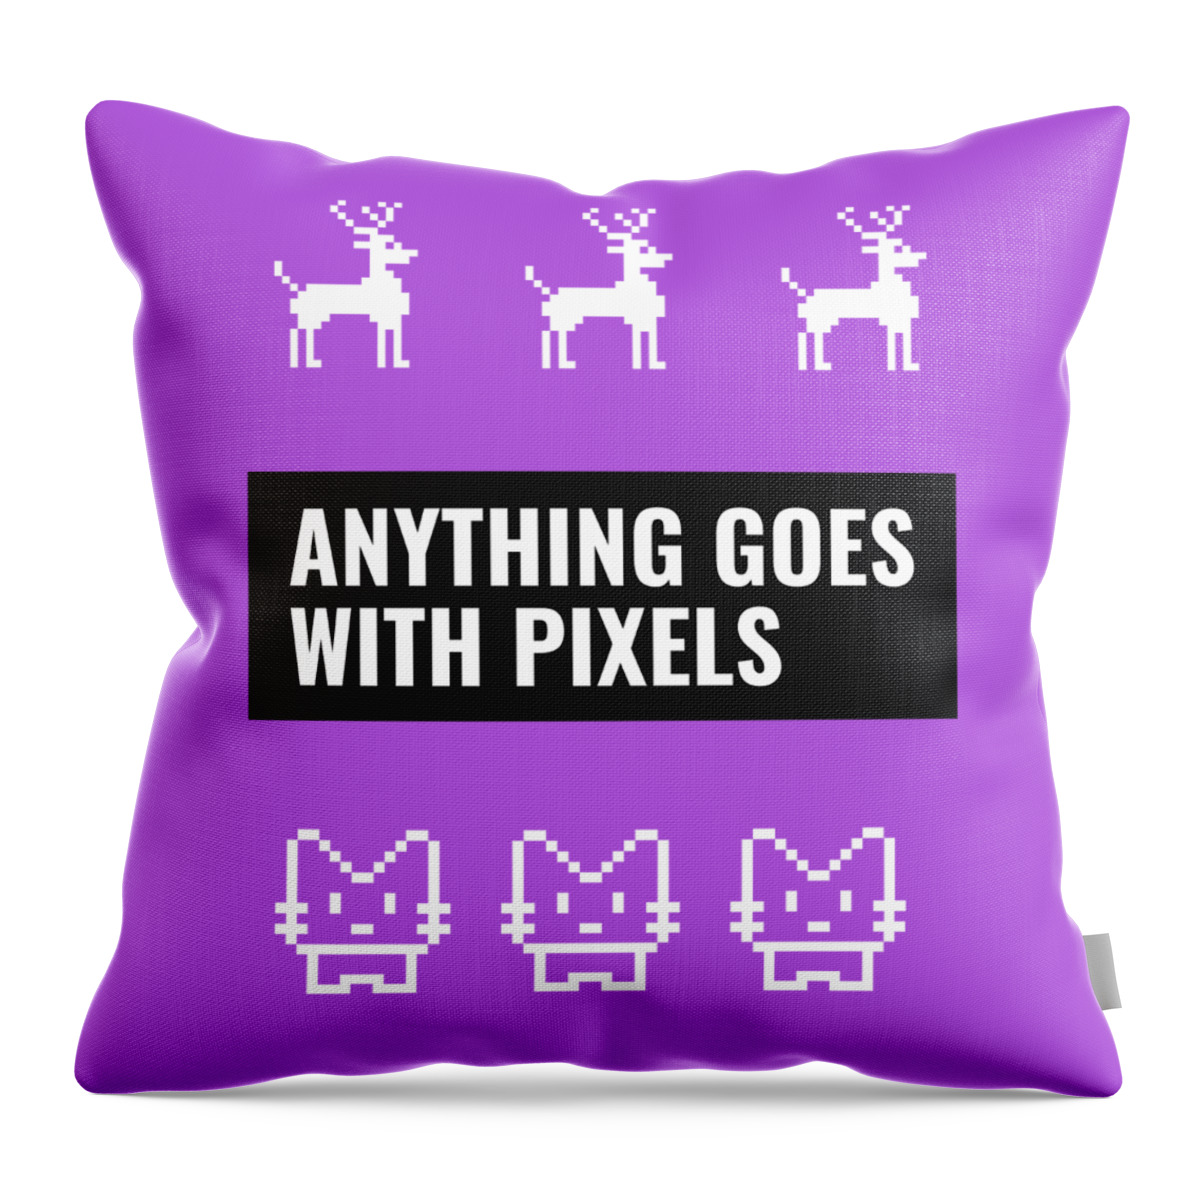 Pixels Throw Pillow featuring the digital art Anything goes with Pixels 01 by Matthias Hauser